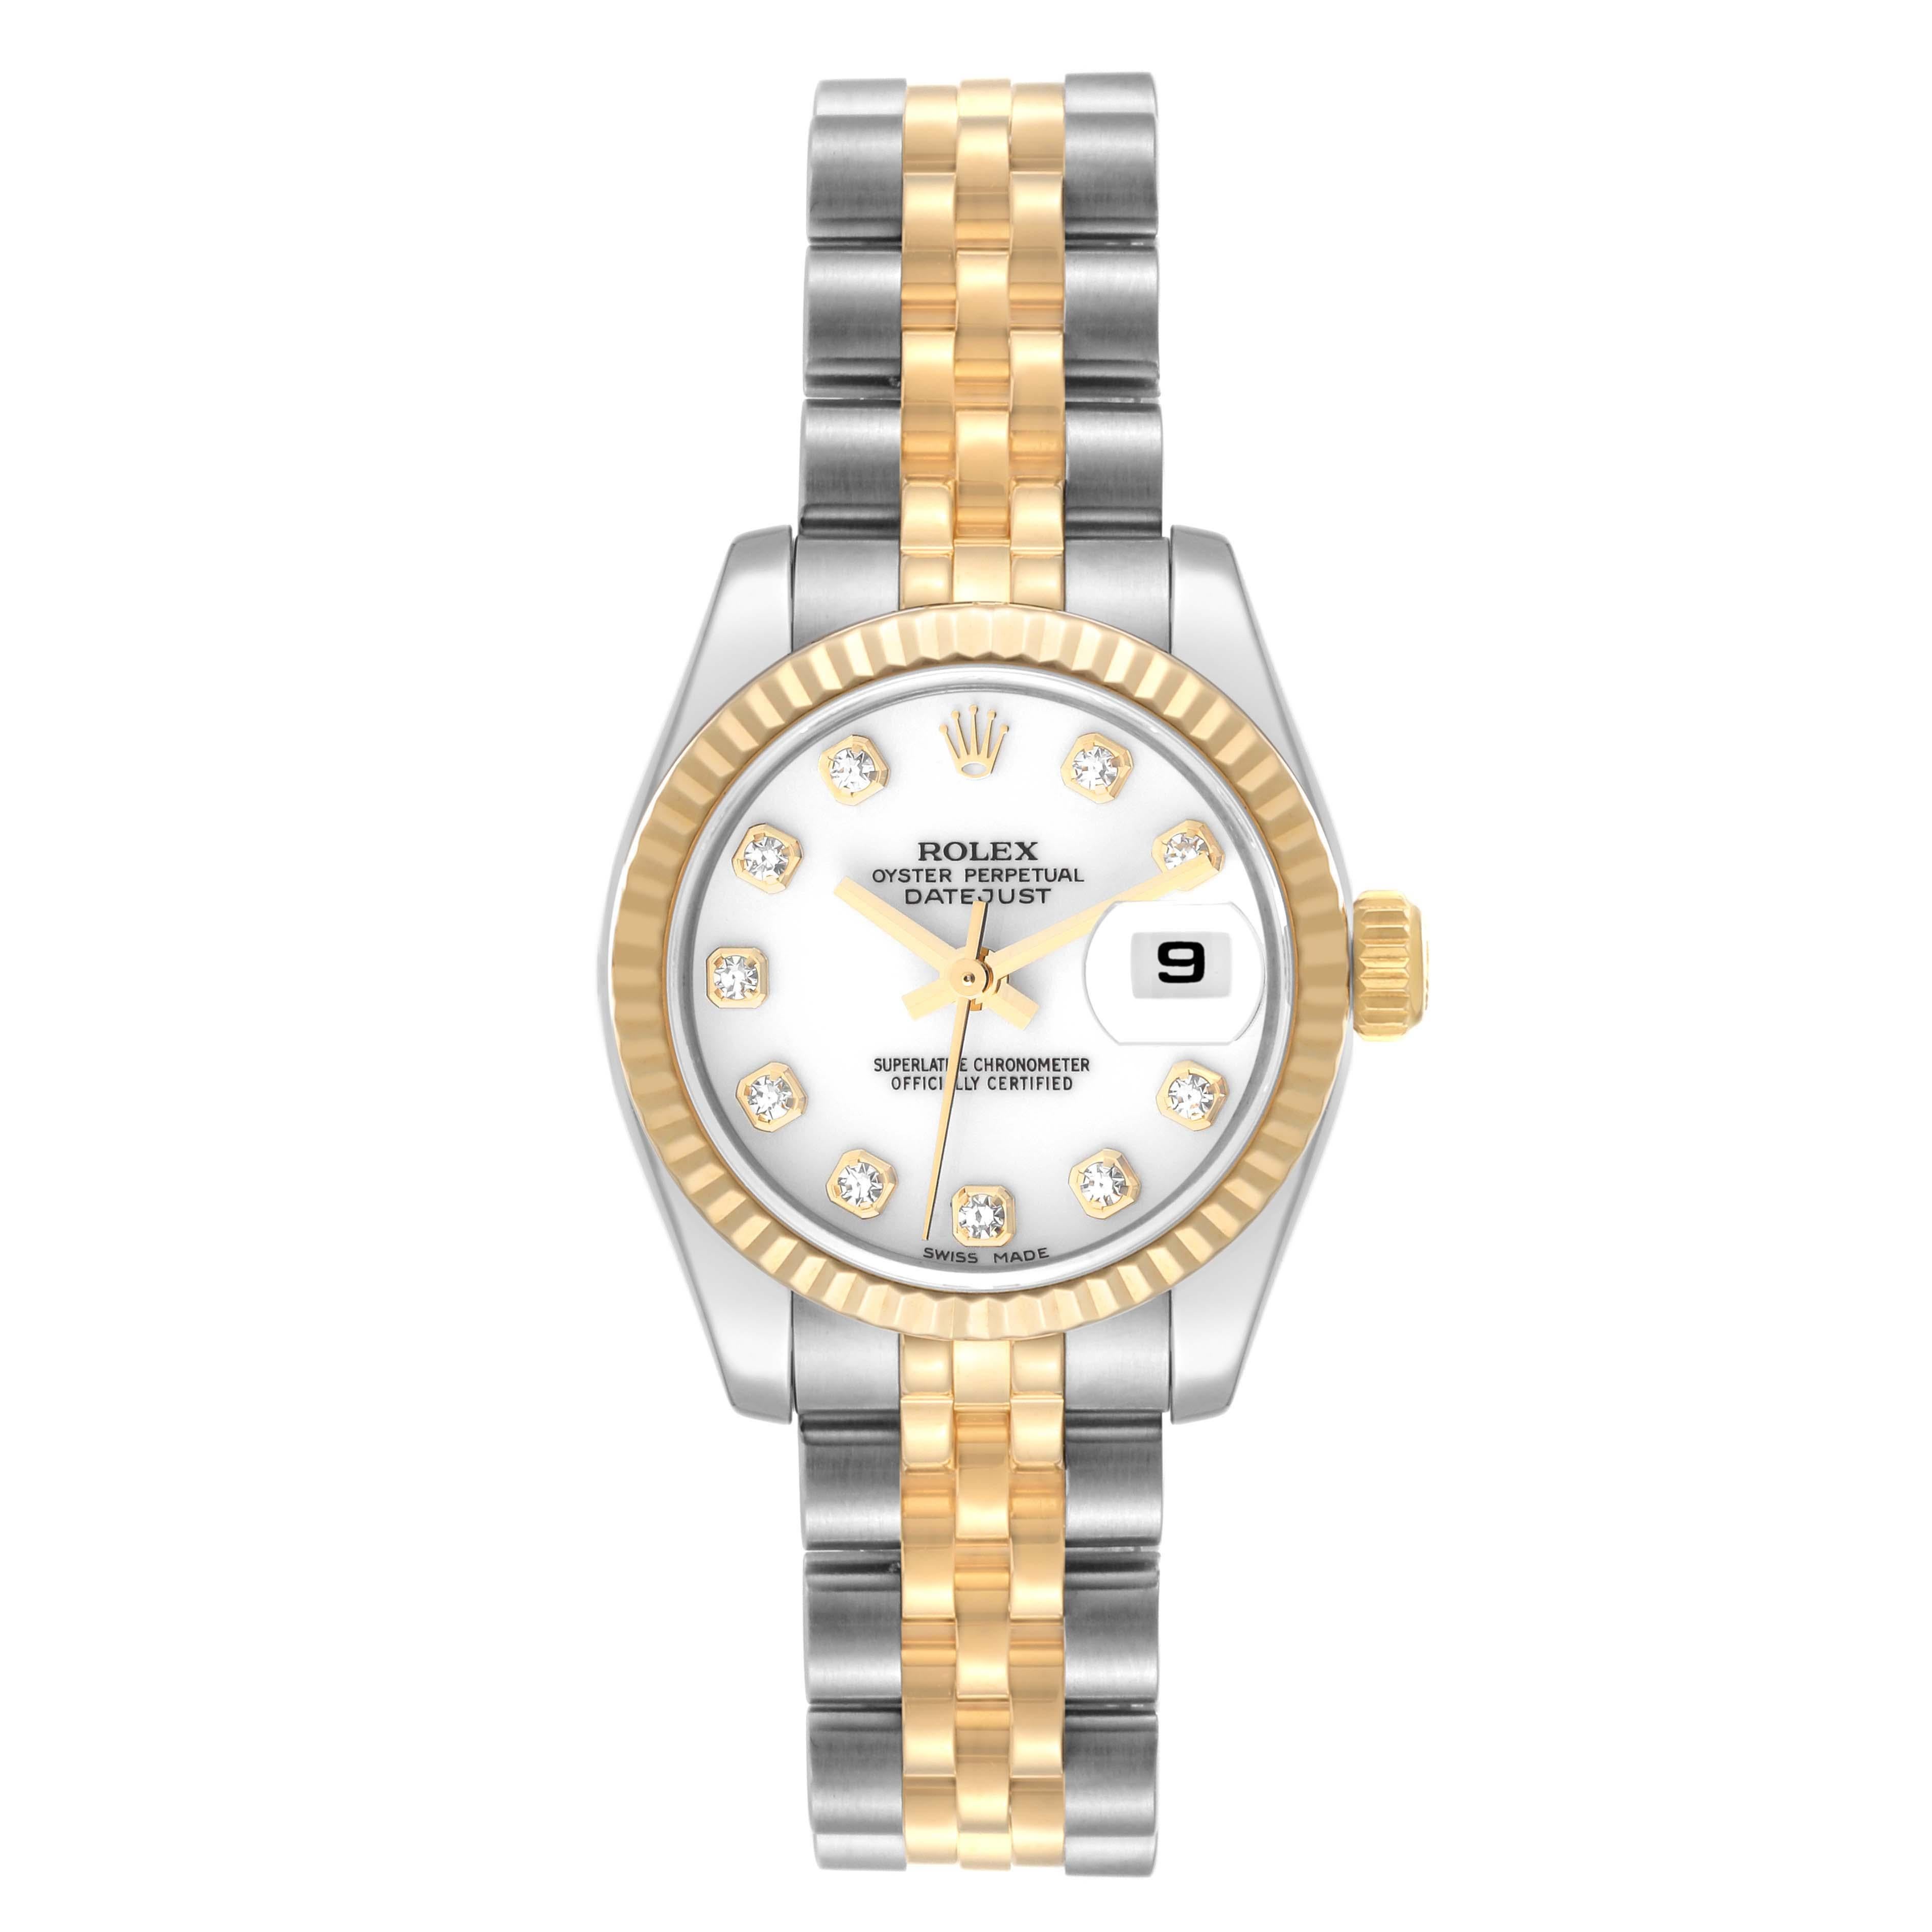 Rolex Datejust Steel Yellow Gold White Diamond Dial Ladies Watch 179173. Officially certified chronometer self-winding movement. Stainless steel oyster case 26 mm in diameter. Rolex logo on a 18K yellow gold crown. 18k yellow gold fluted bezel.